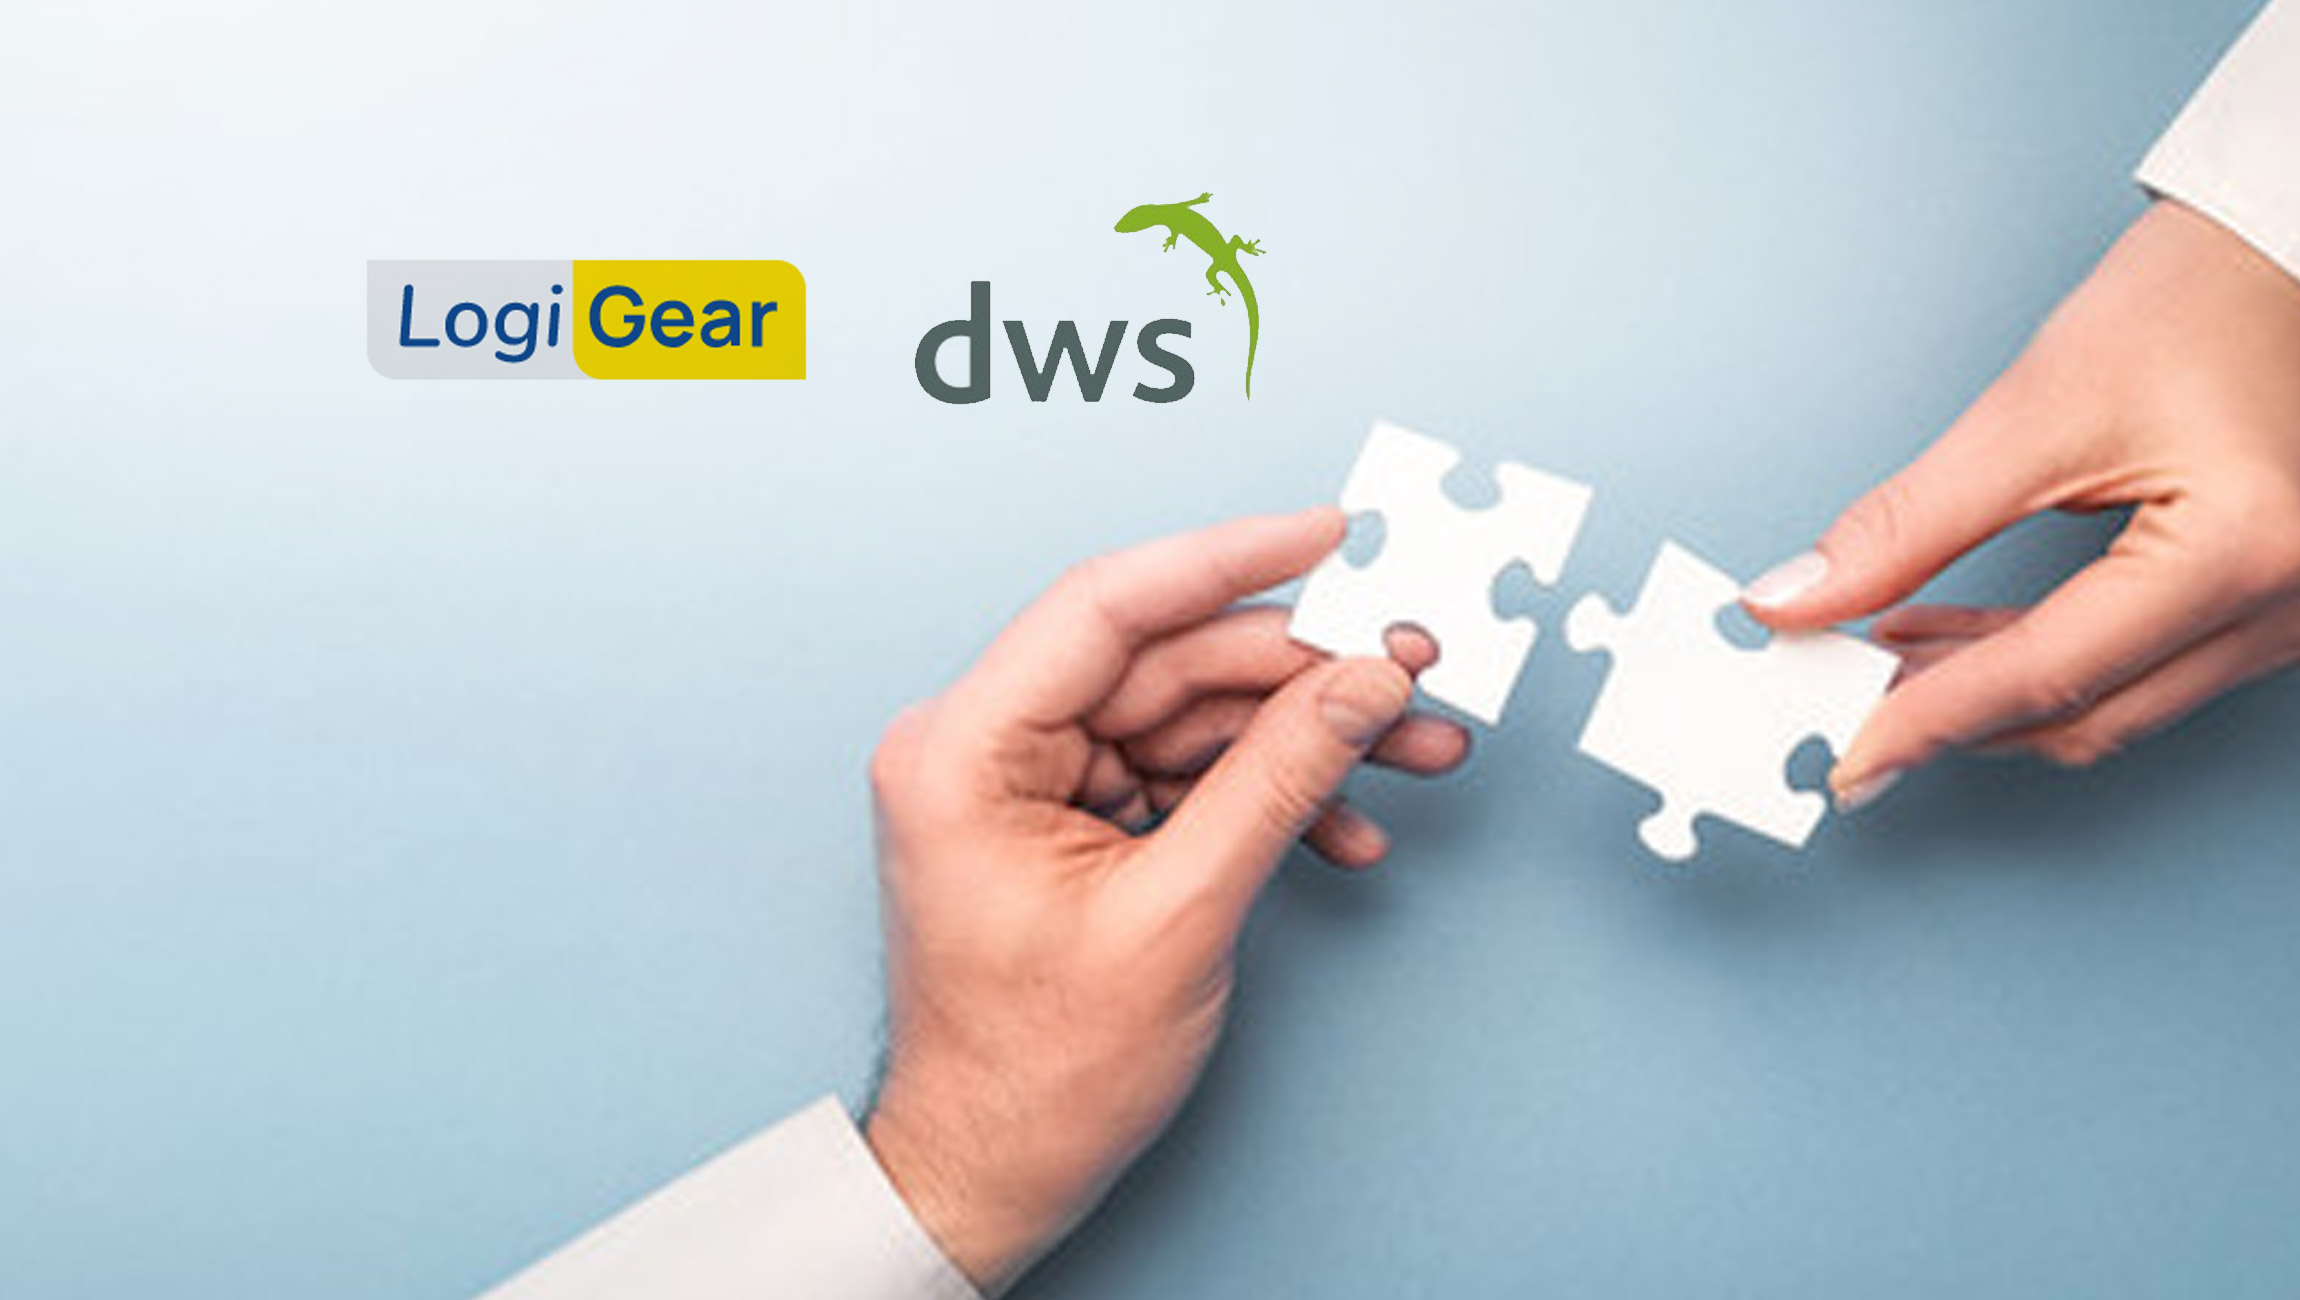 LogiGear Acquires DWS, Expands Suite of Products and Services into ERP via Oracle’s JD Edwards E1 and Fusion Cloud Apps